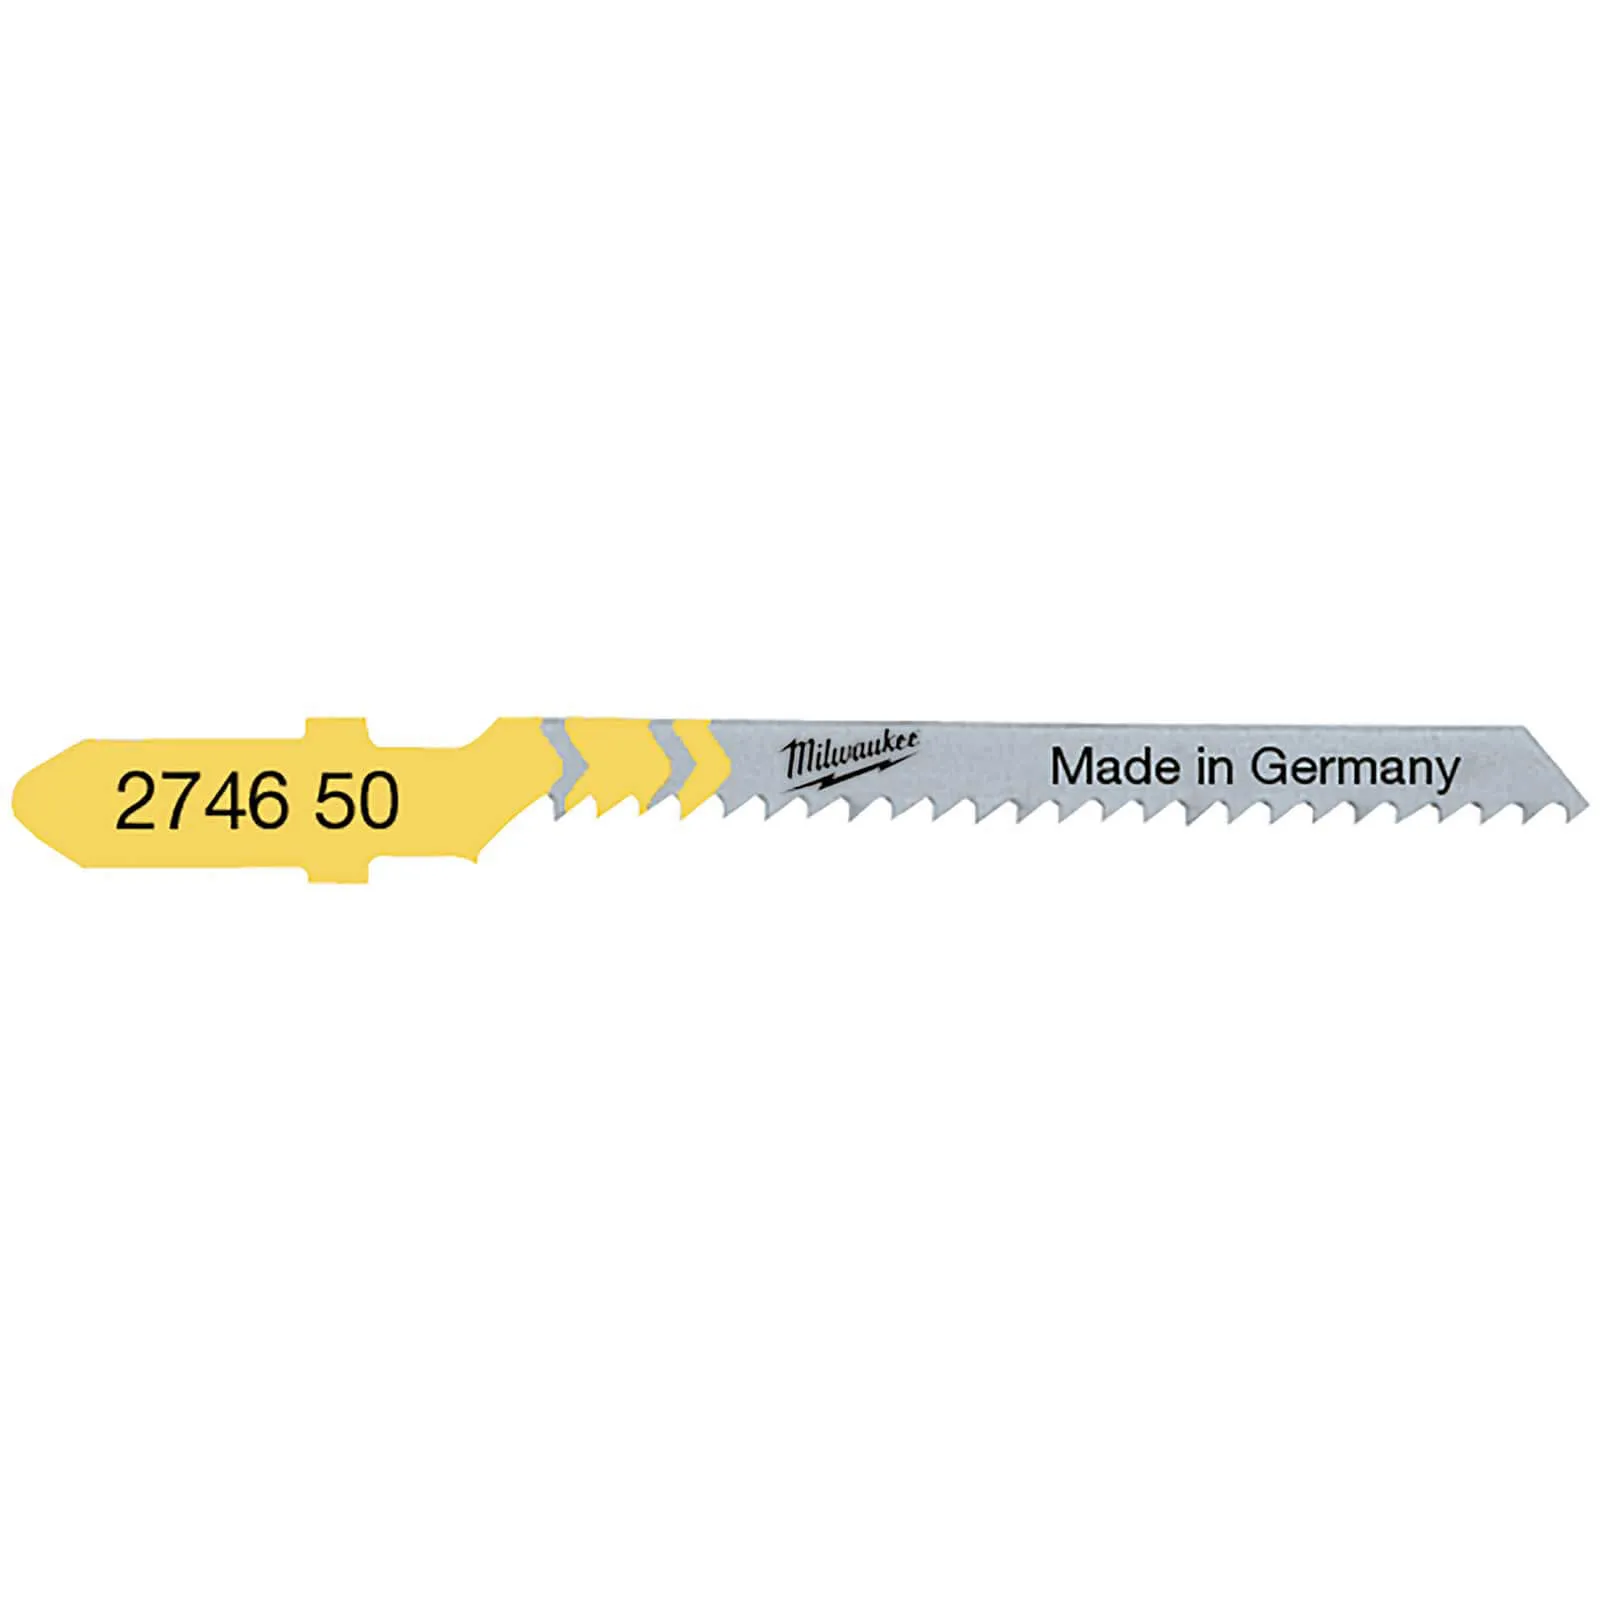 Milwaukee T119BO Wood and Plastic Curve Cutting Jigsaw Blades - Pack of 5